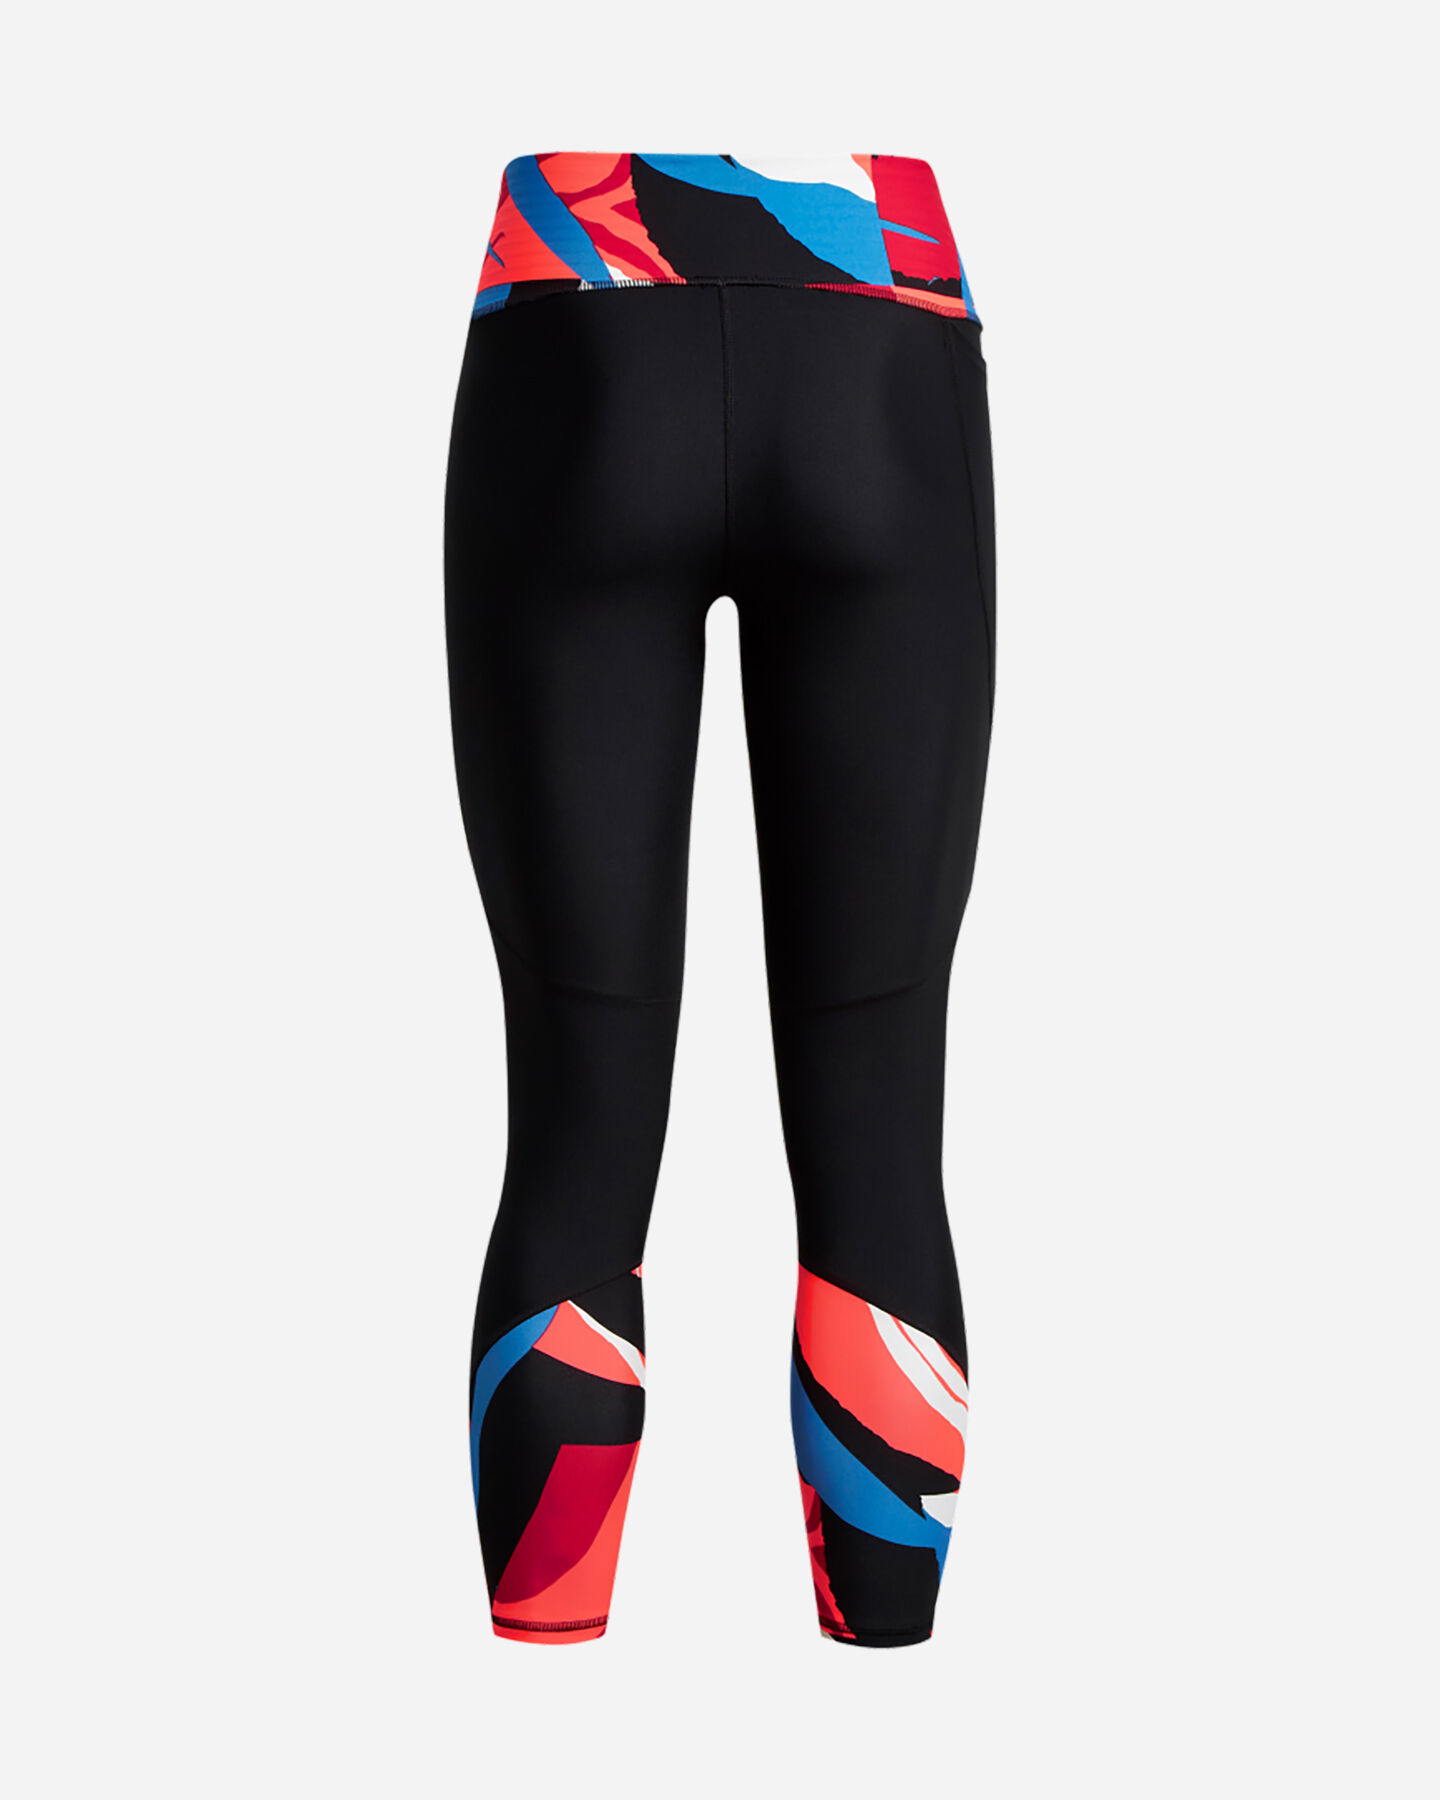  Leggings UNDER ARMOUR POLY INSERT AOP W S5390719|0001|XS scatto 1